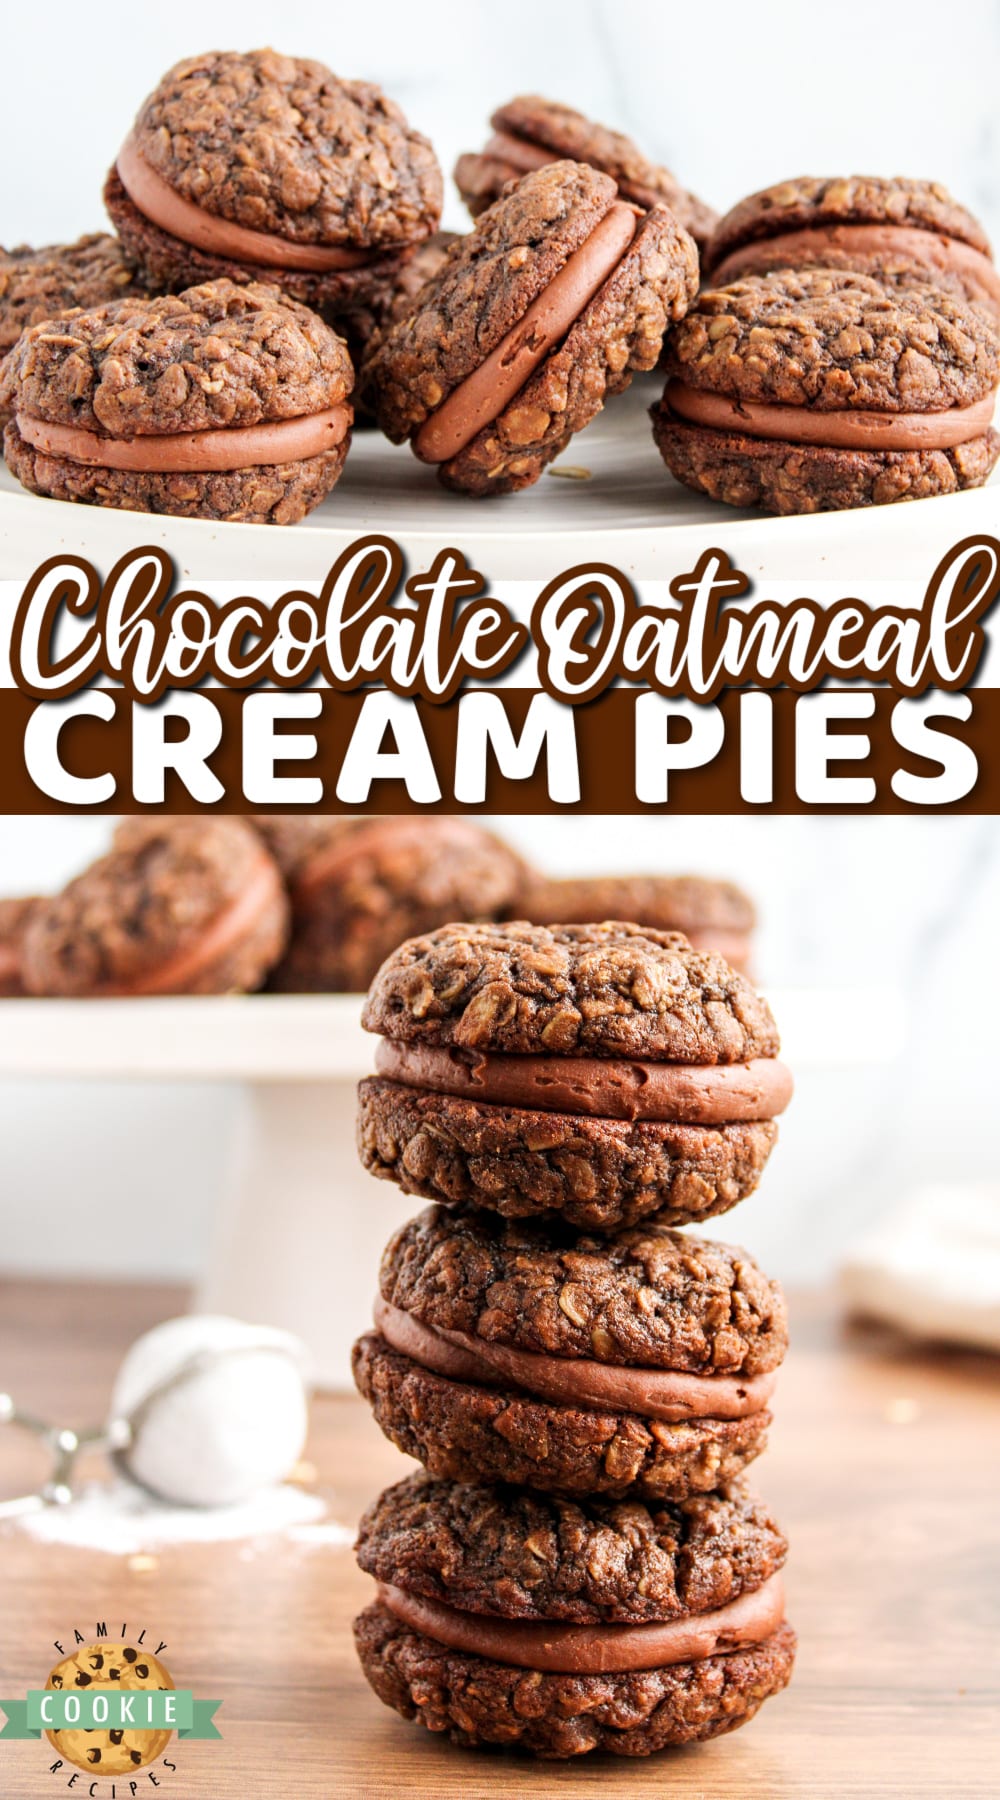 Chocolate Oatmeal Cream Pies are cookie sandwiches made with a simple chocolate buttercream frosting in between soft and chewy chocolate oatmeal cookies. via @buttergirls